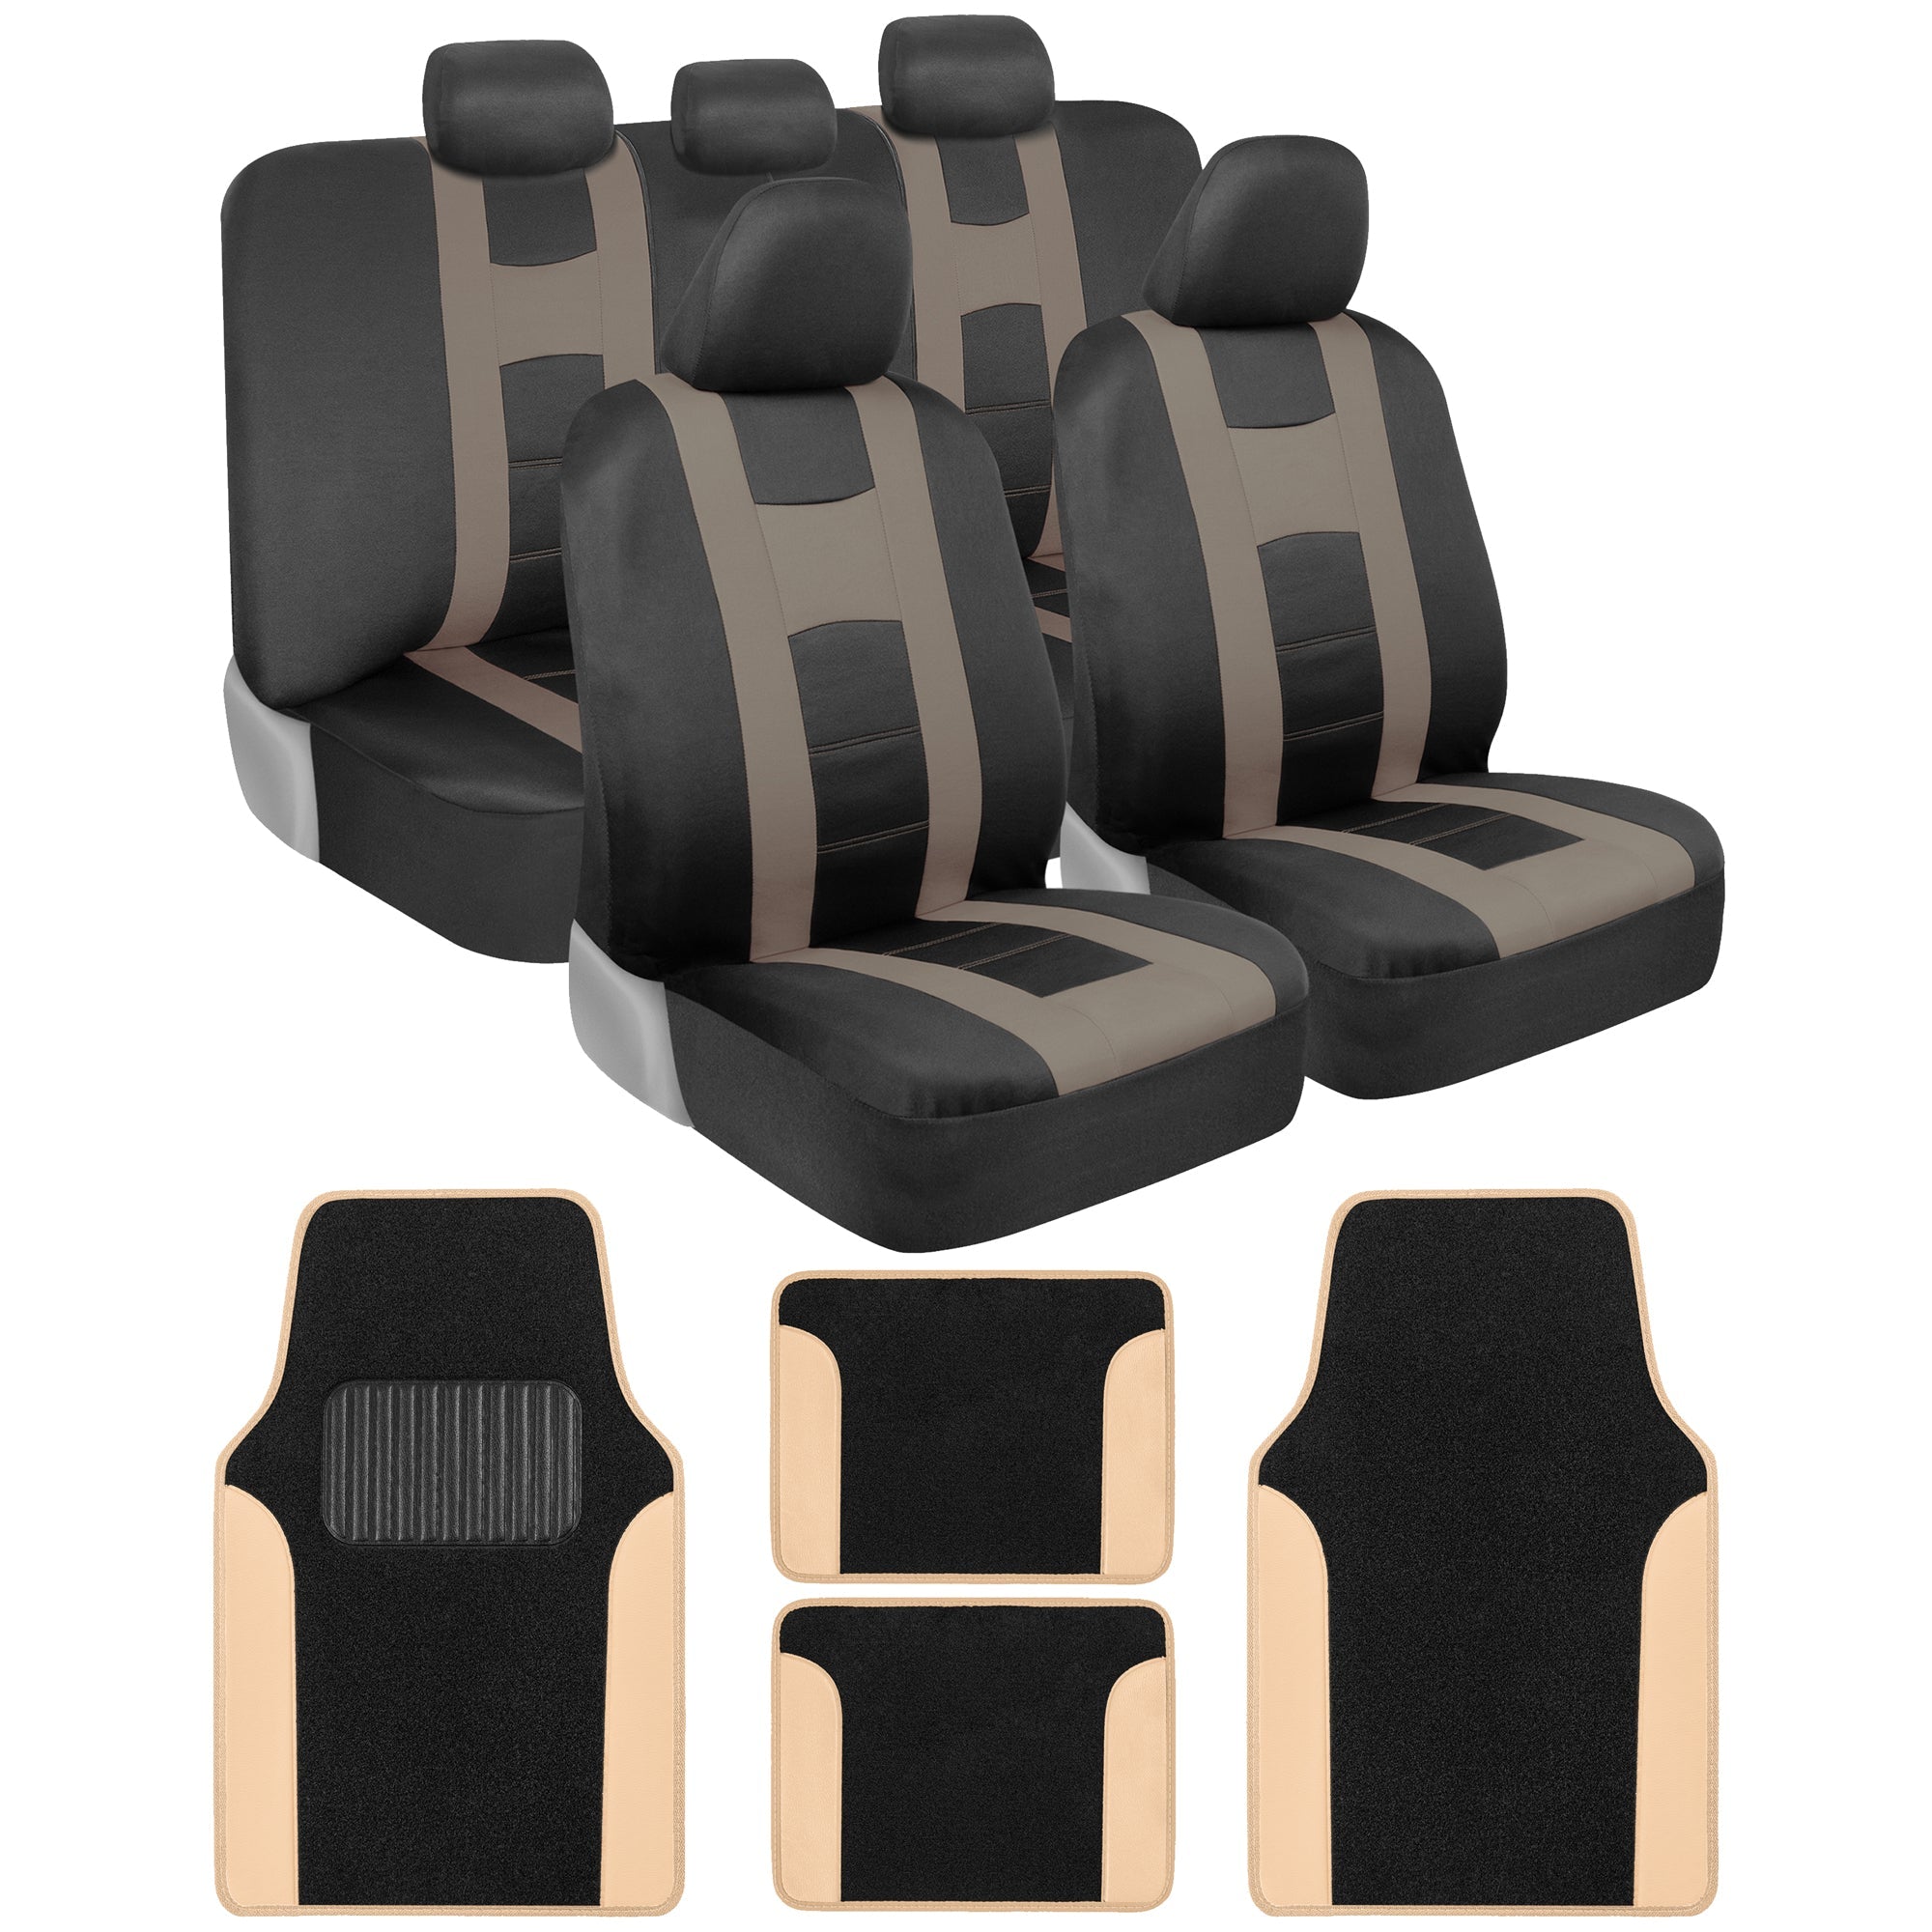 carXS Forza Series Red Seat Covers Full Set Combo with Car Floor Mats – Front and Rear Bench Seat Cover & Floor Mat Protector Set, Interior Covers for Auto Truck Van SUV - Beige